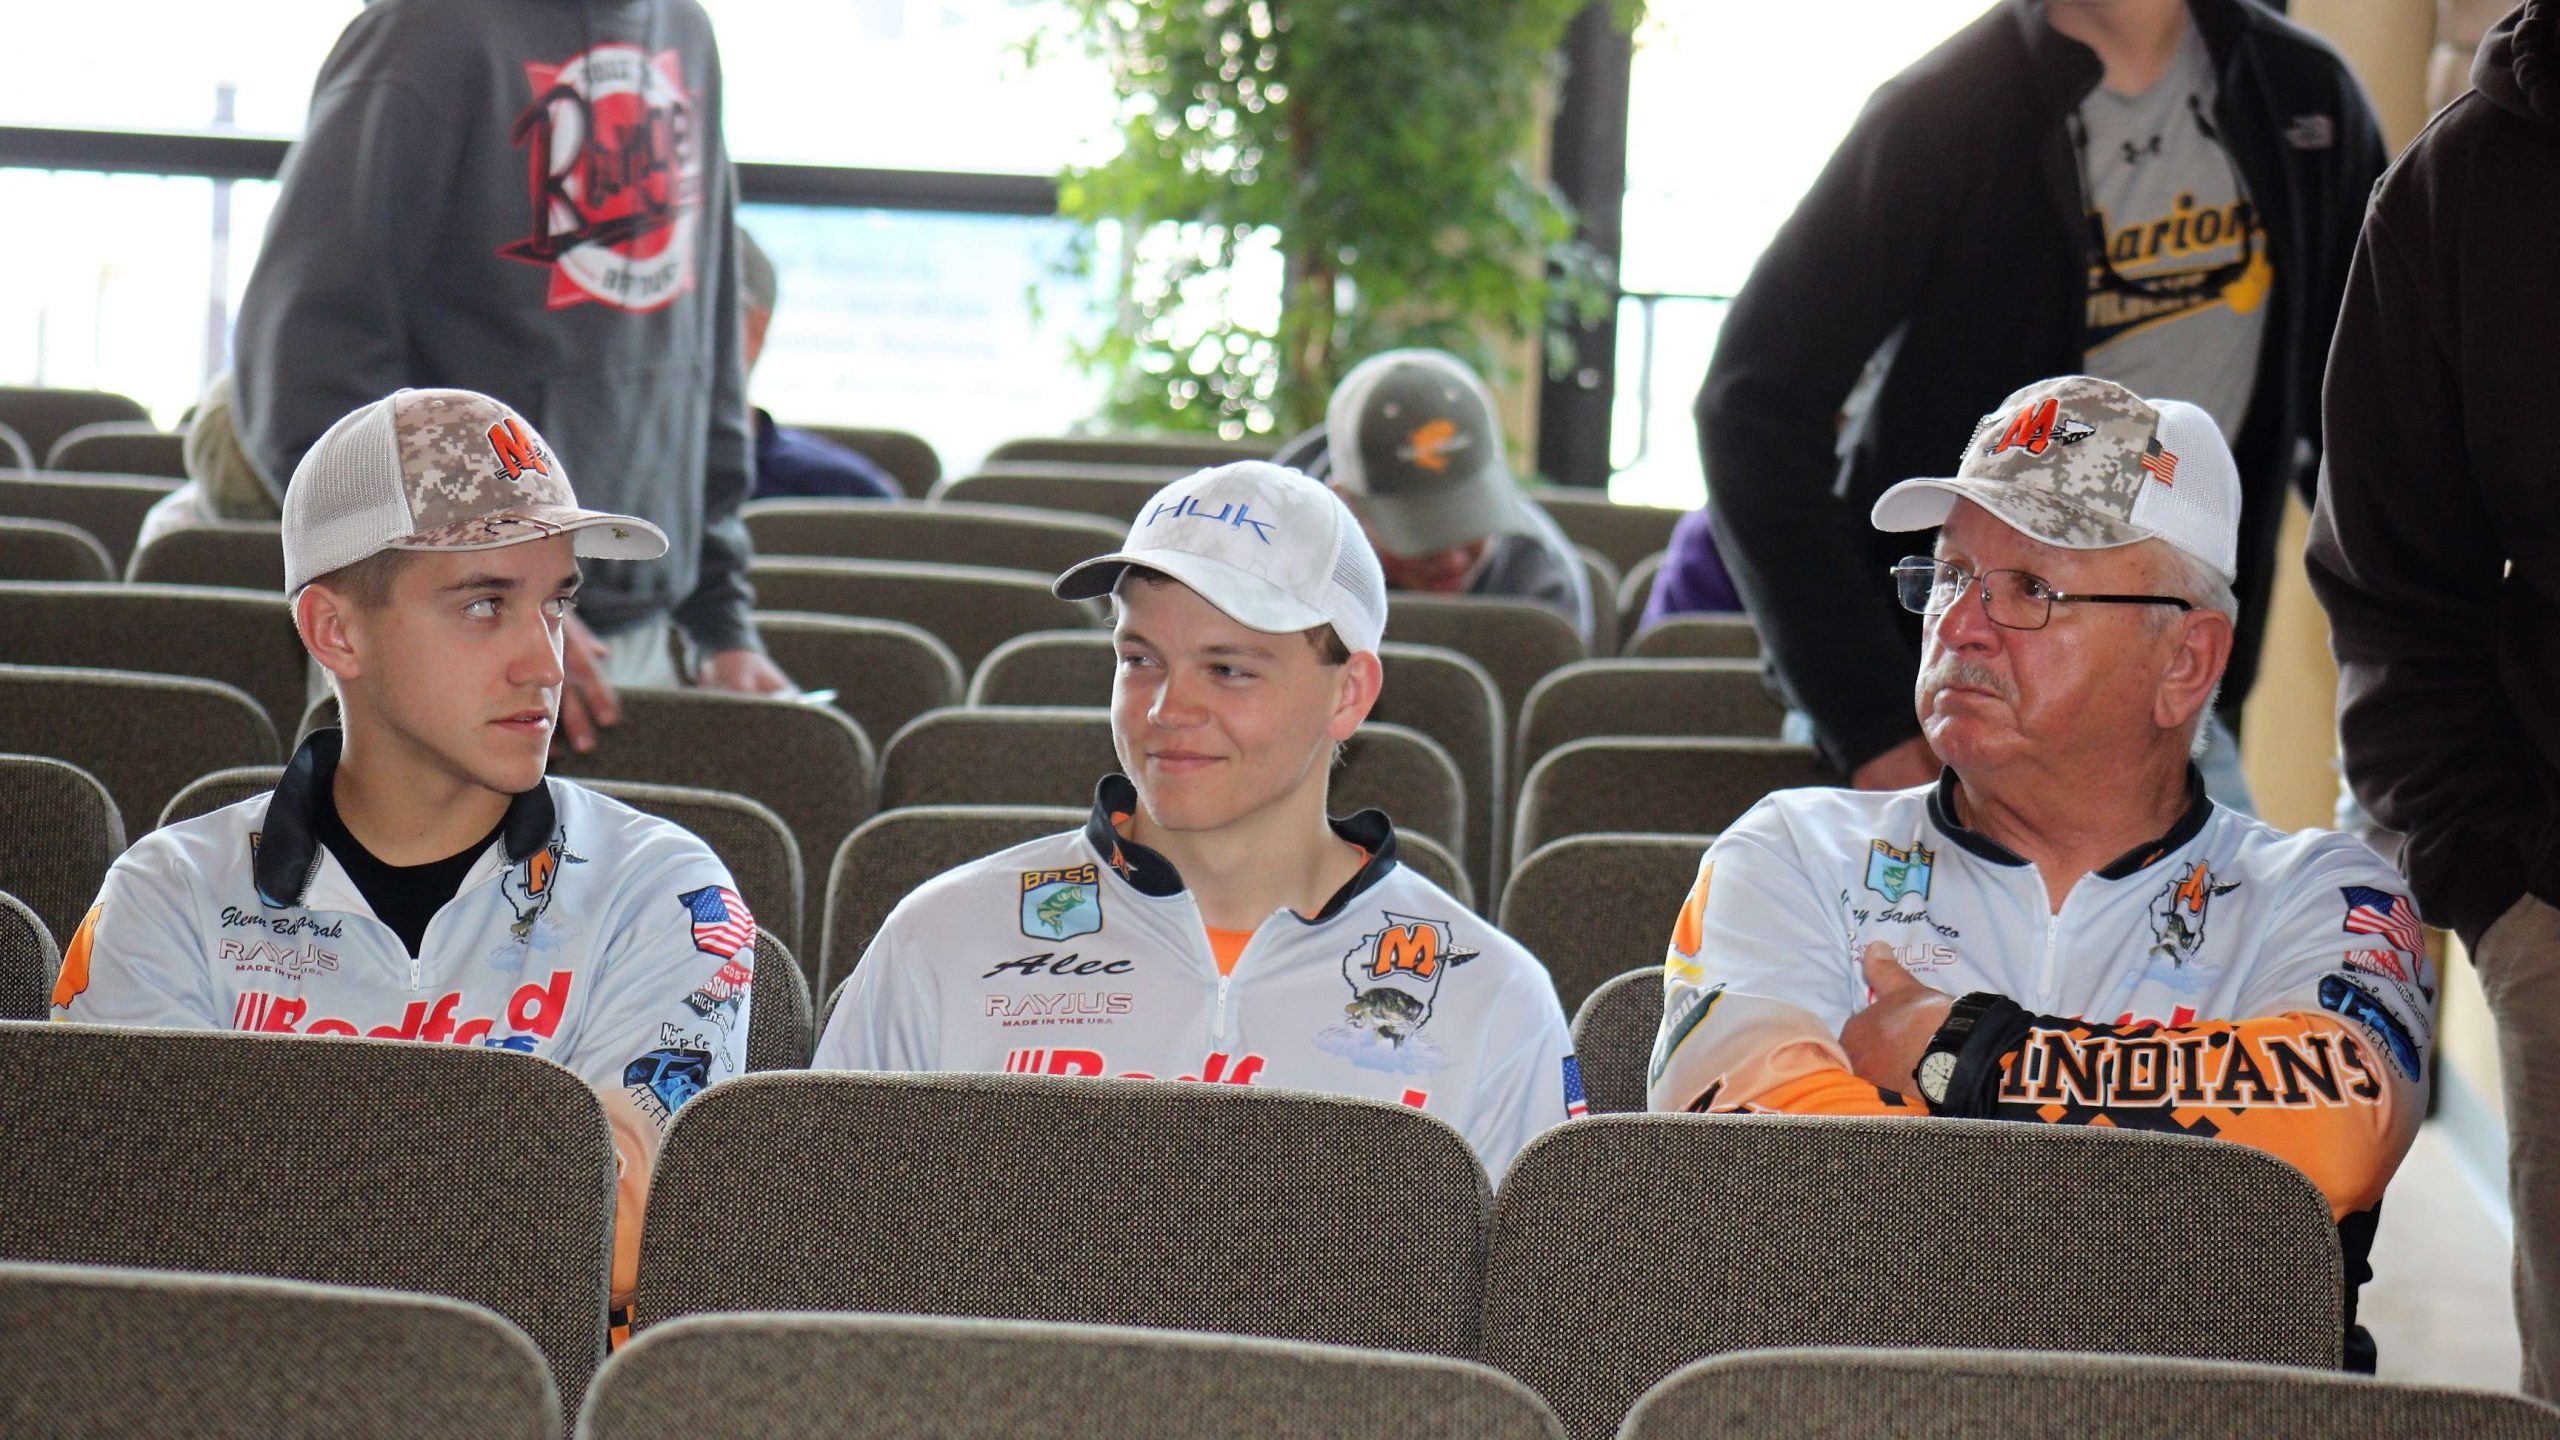 Anglers Glenn Banaszak and Alec Berens of the Minooka (Illinois) Anglers Bass Club are here with their captain Jerry Sandretto.